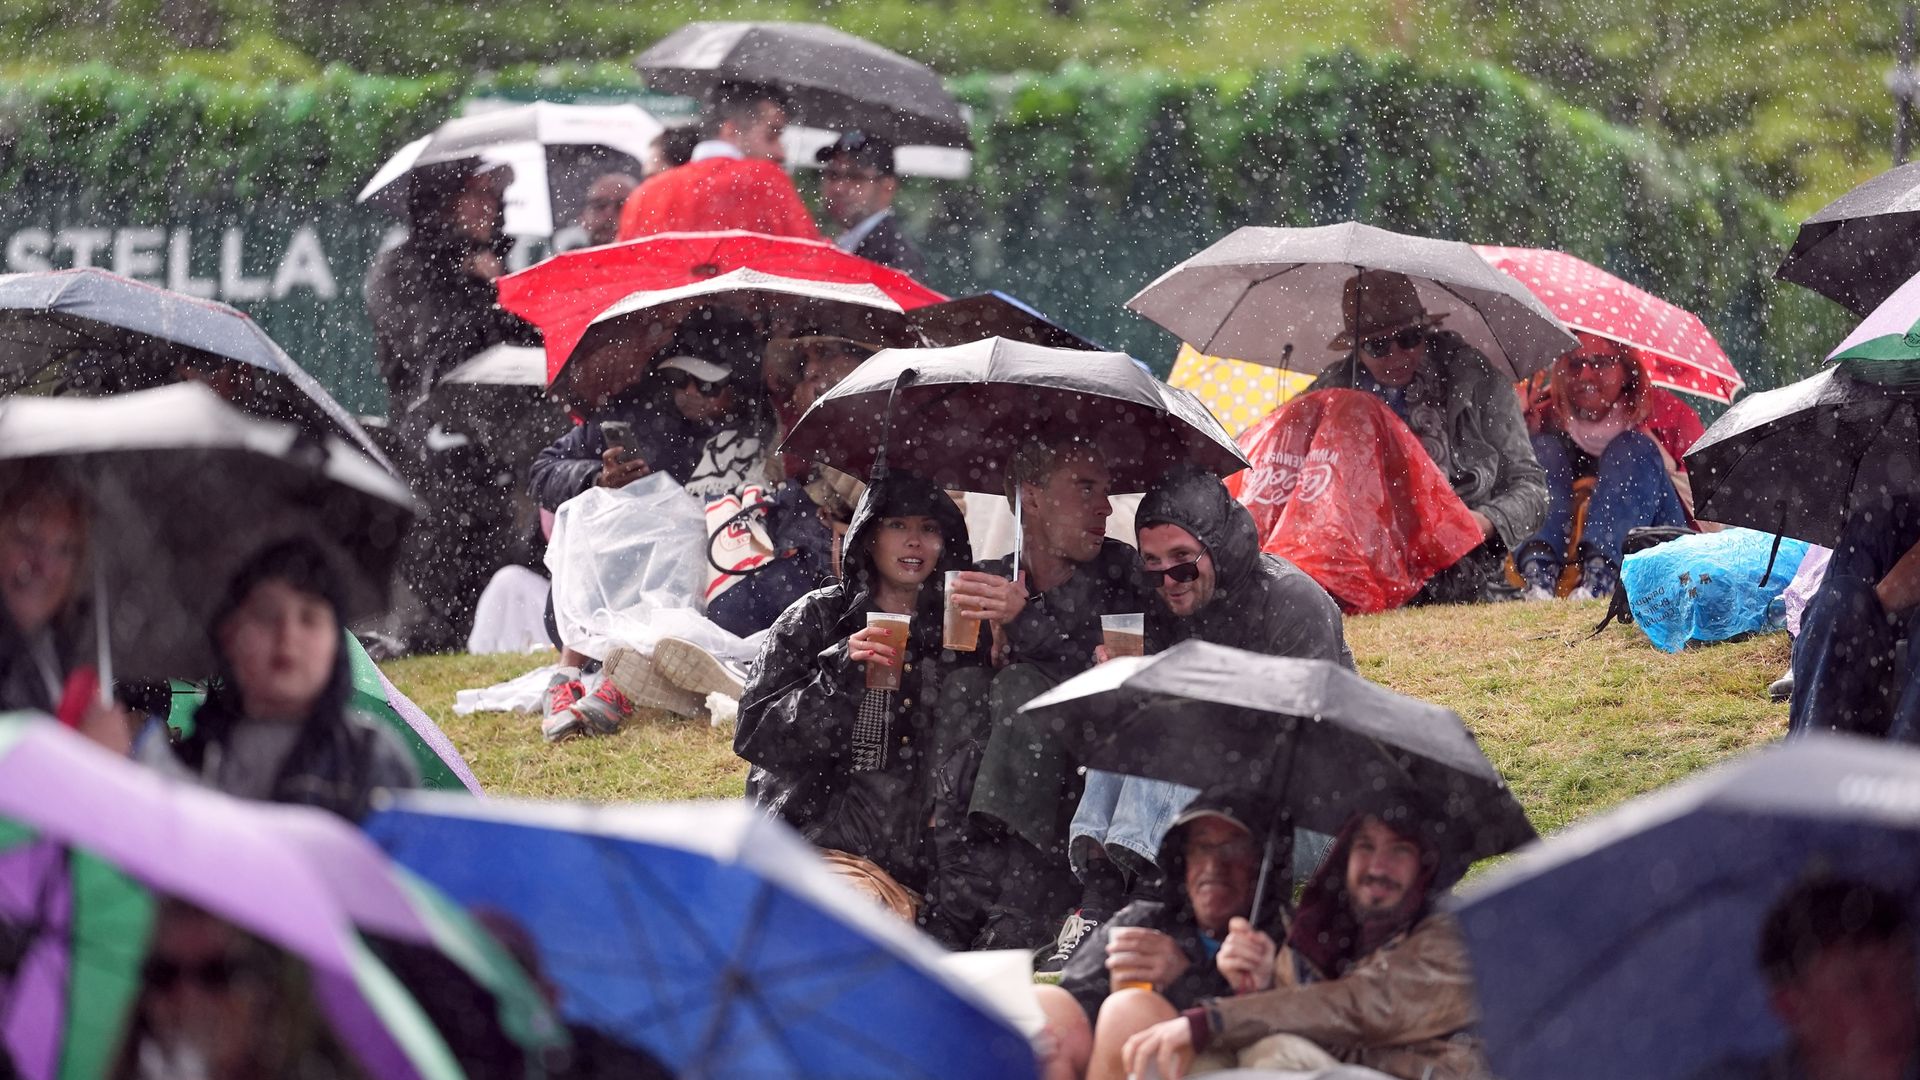 UK sporting events face disruption as weekend washout continues